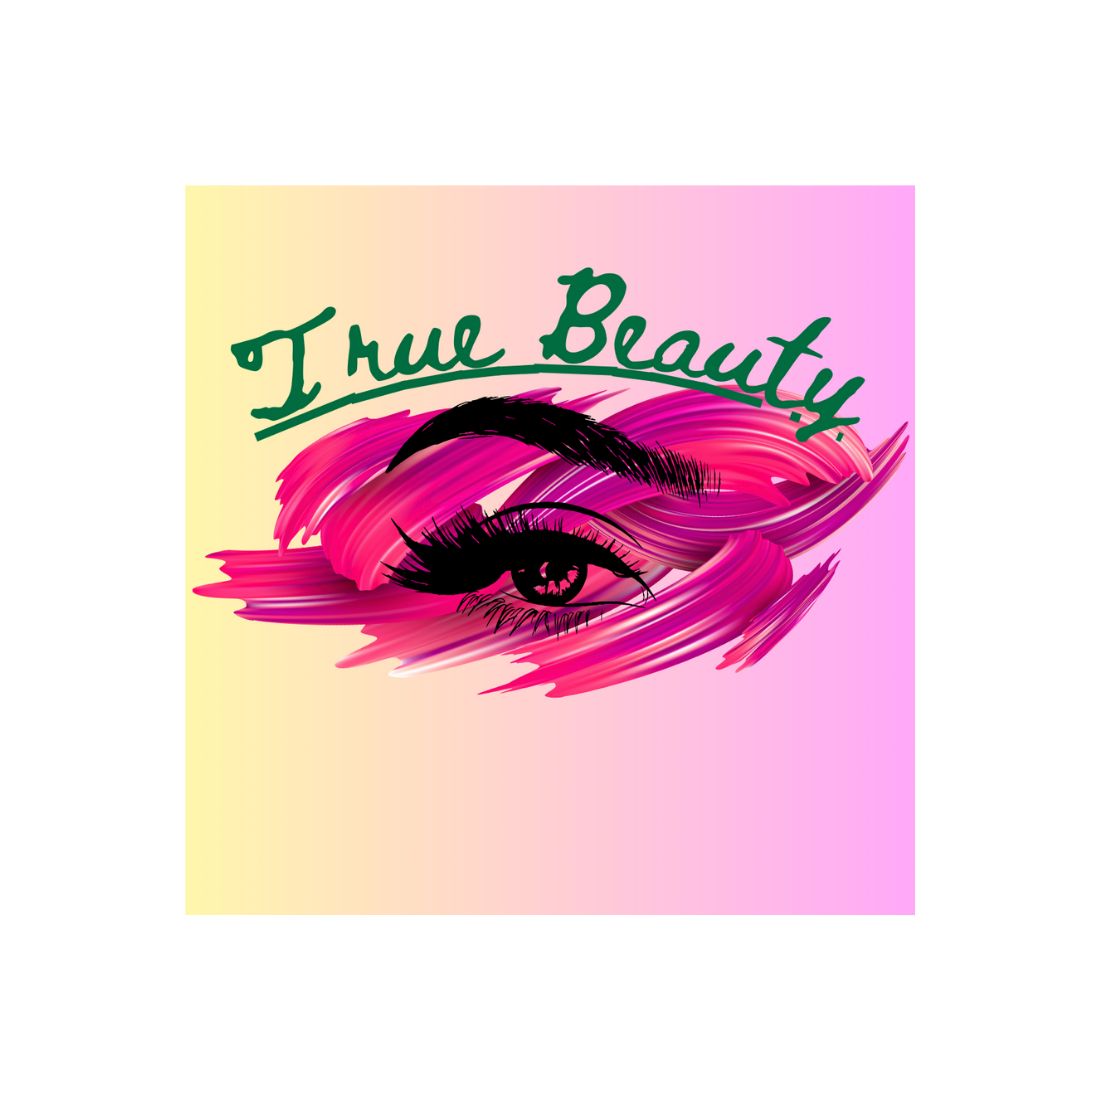 FOR THE FUTURE BEAUTY preview image.